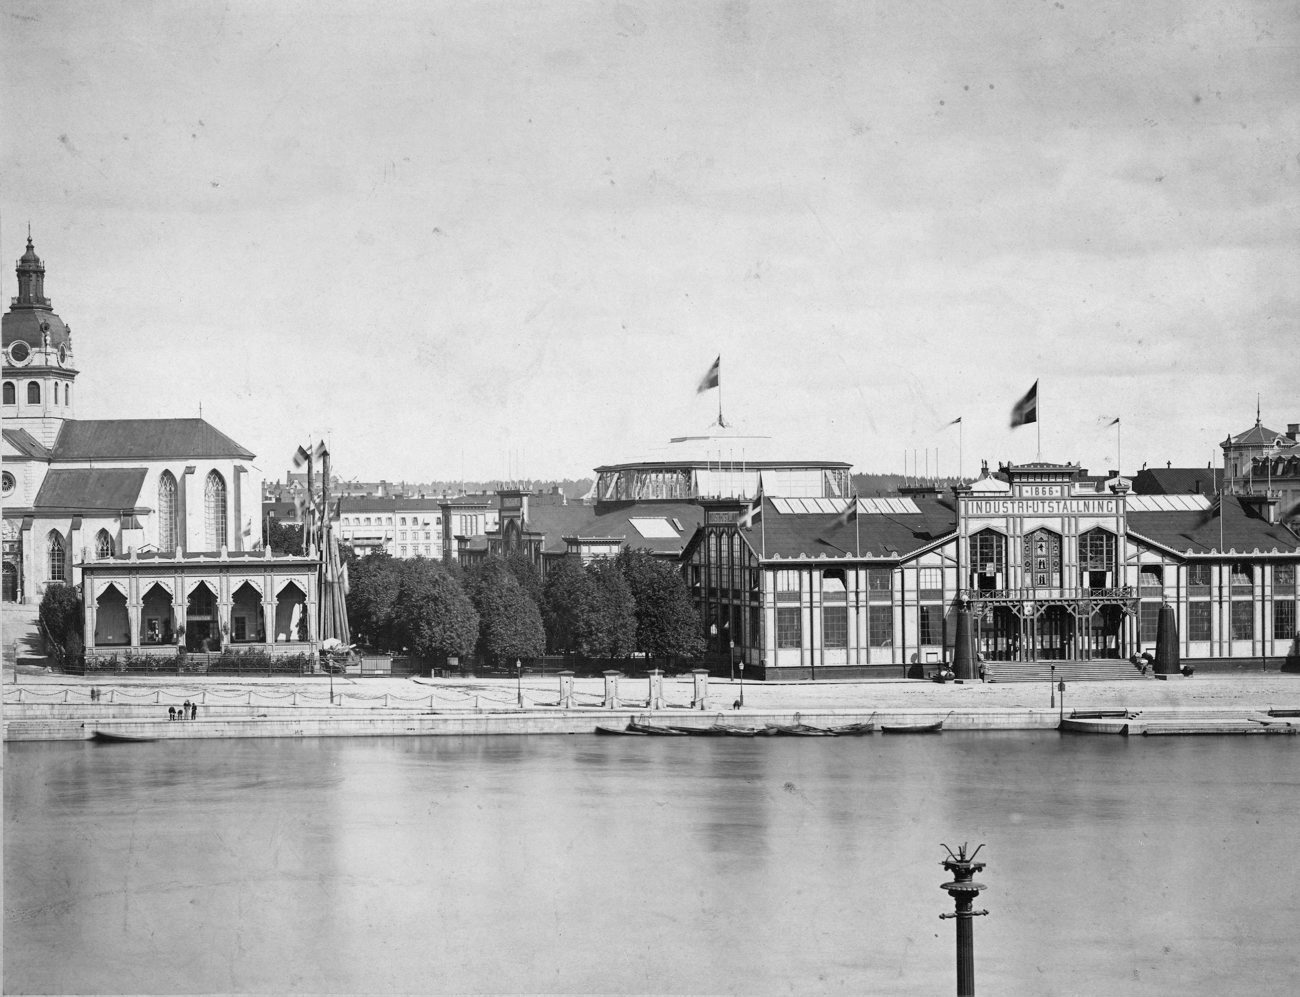 old picture of a city building with water